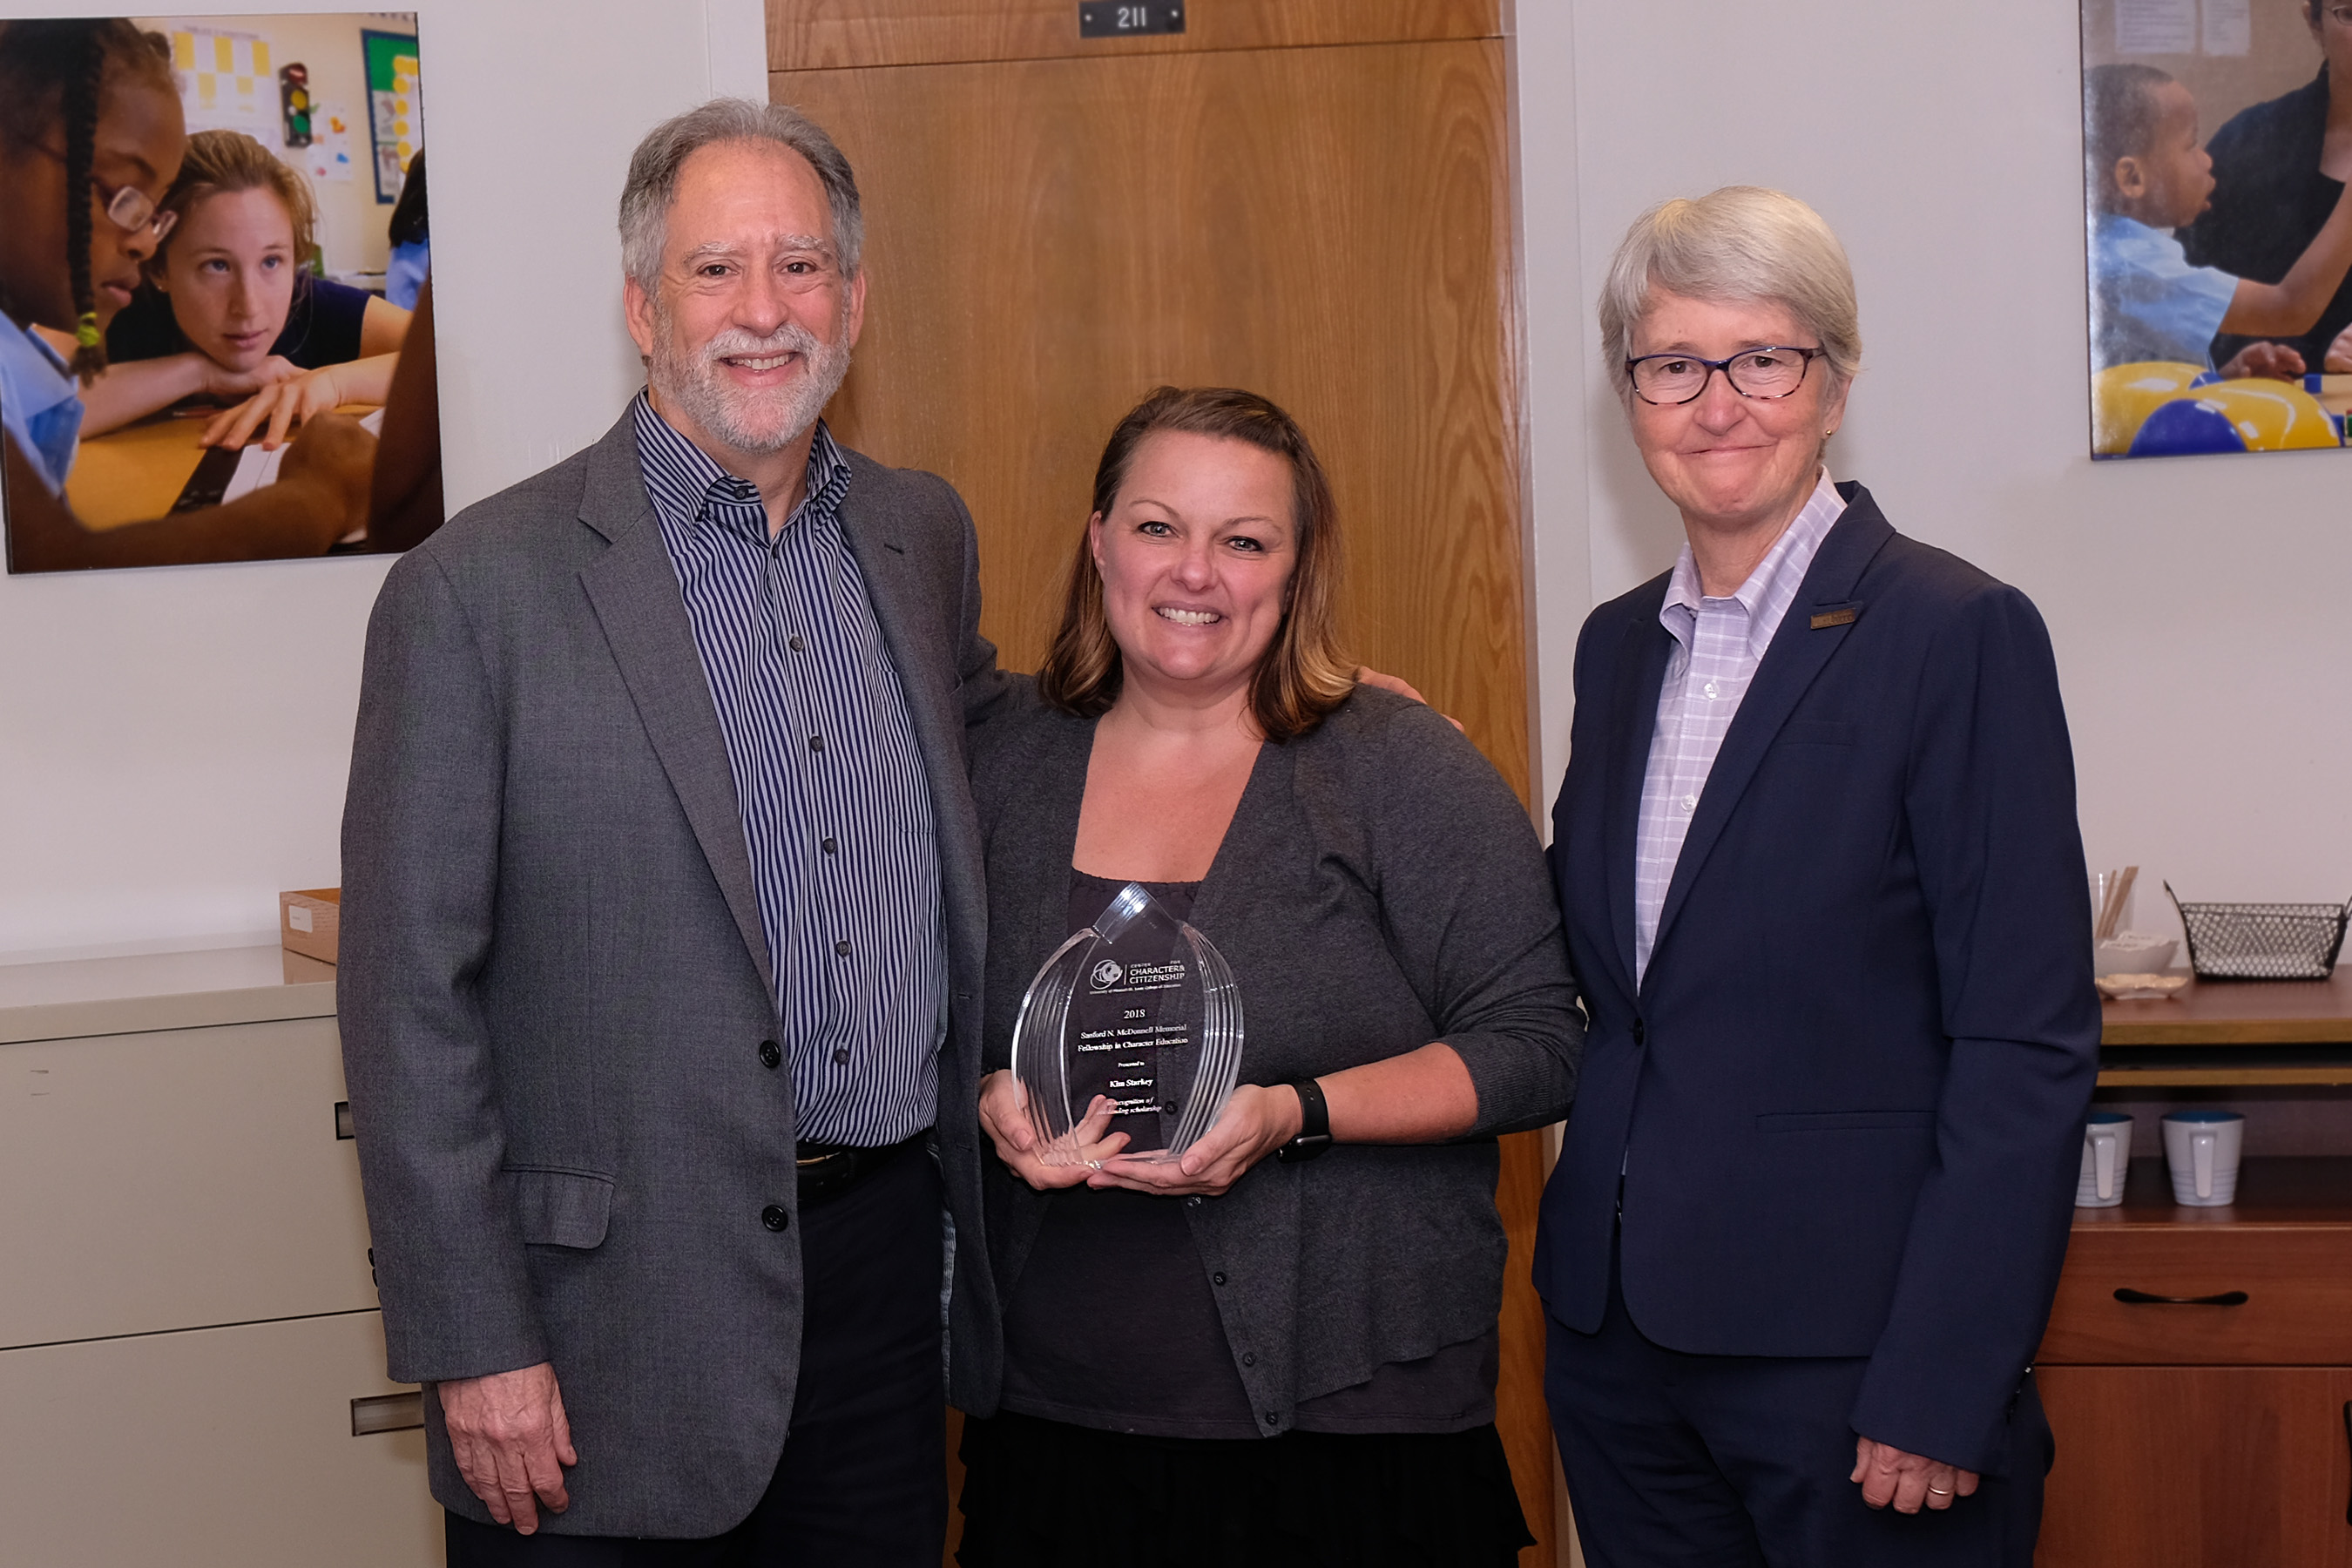 PhD student Kim Starkey earned the Sanford N. McDonnell Memorial Fellowship in Character Education, presented to her by Marvin Berkowitz and Ann Taylor.